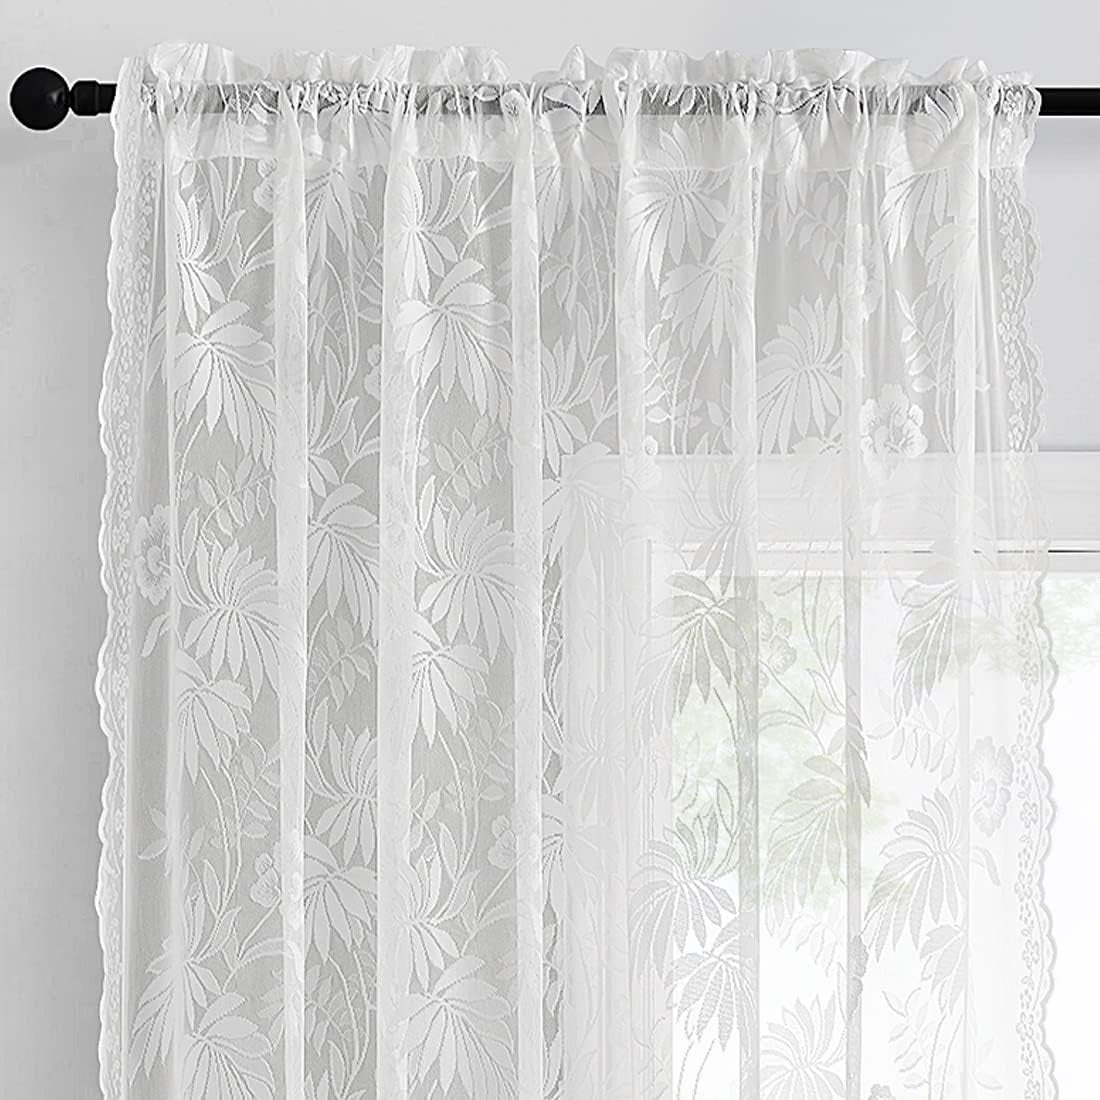 Kotile Lace Curtains 72 Inch Length - Embroidery Natural Palm Leaf Floral White Lace Curtains for Bedroom, Rod Pocket Privacy Sheer Scalloped Lace Window Curtains 2 Panels Set, 52 X 72 Inch, White  Kotile Textile   